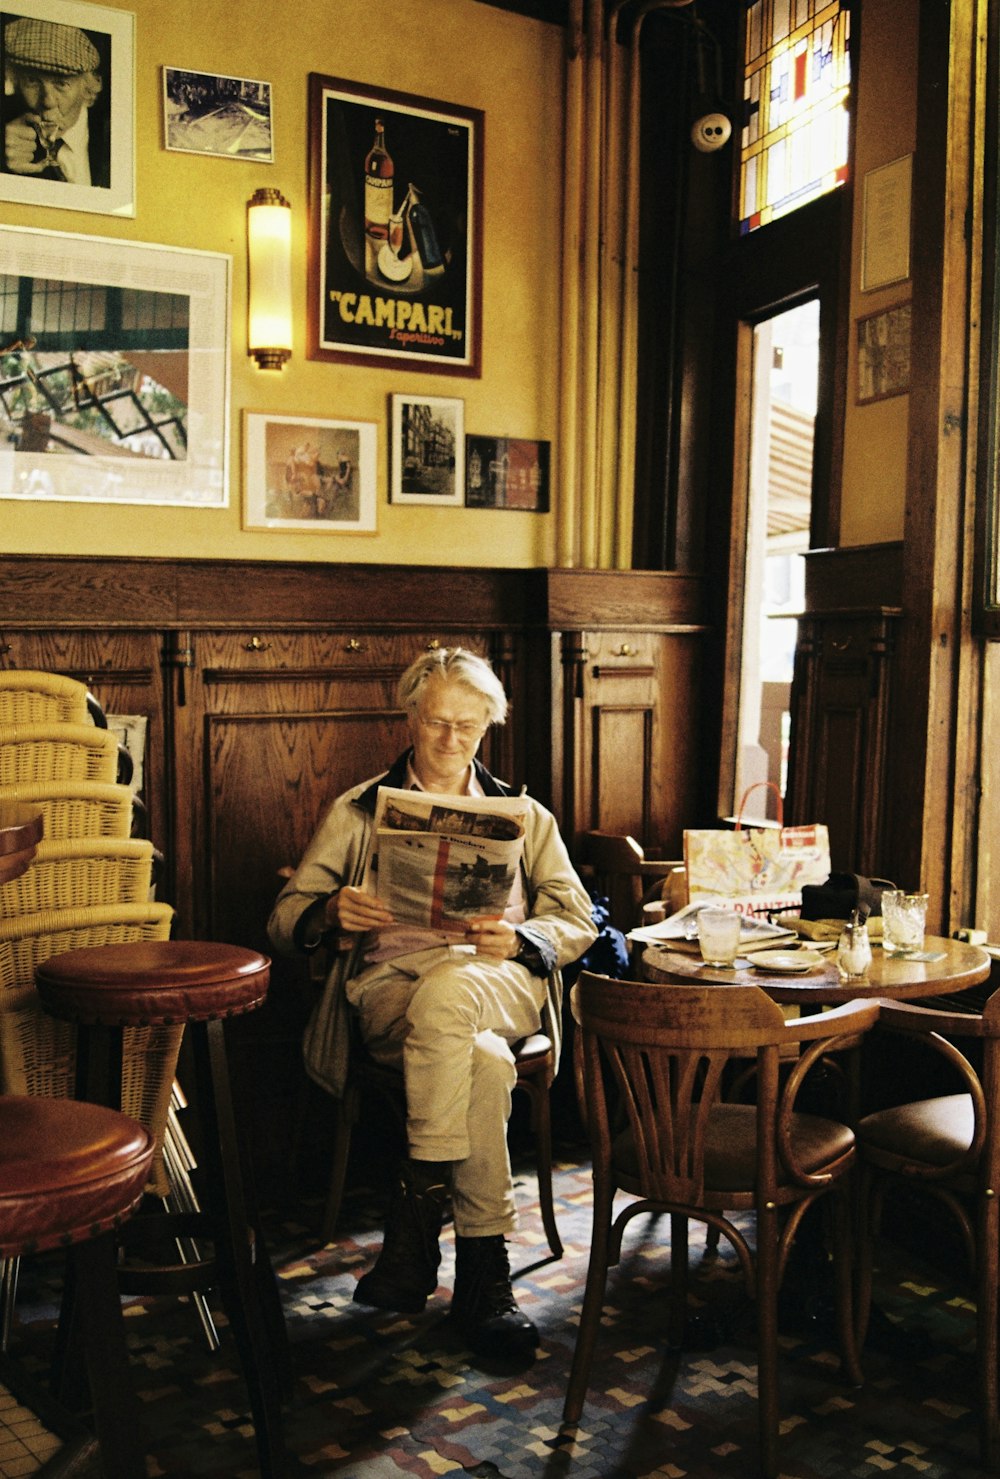 man in brown jacket sitting on chair reading newspaper